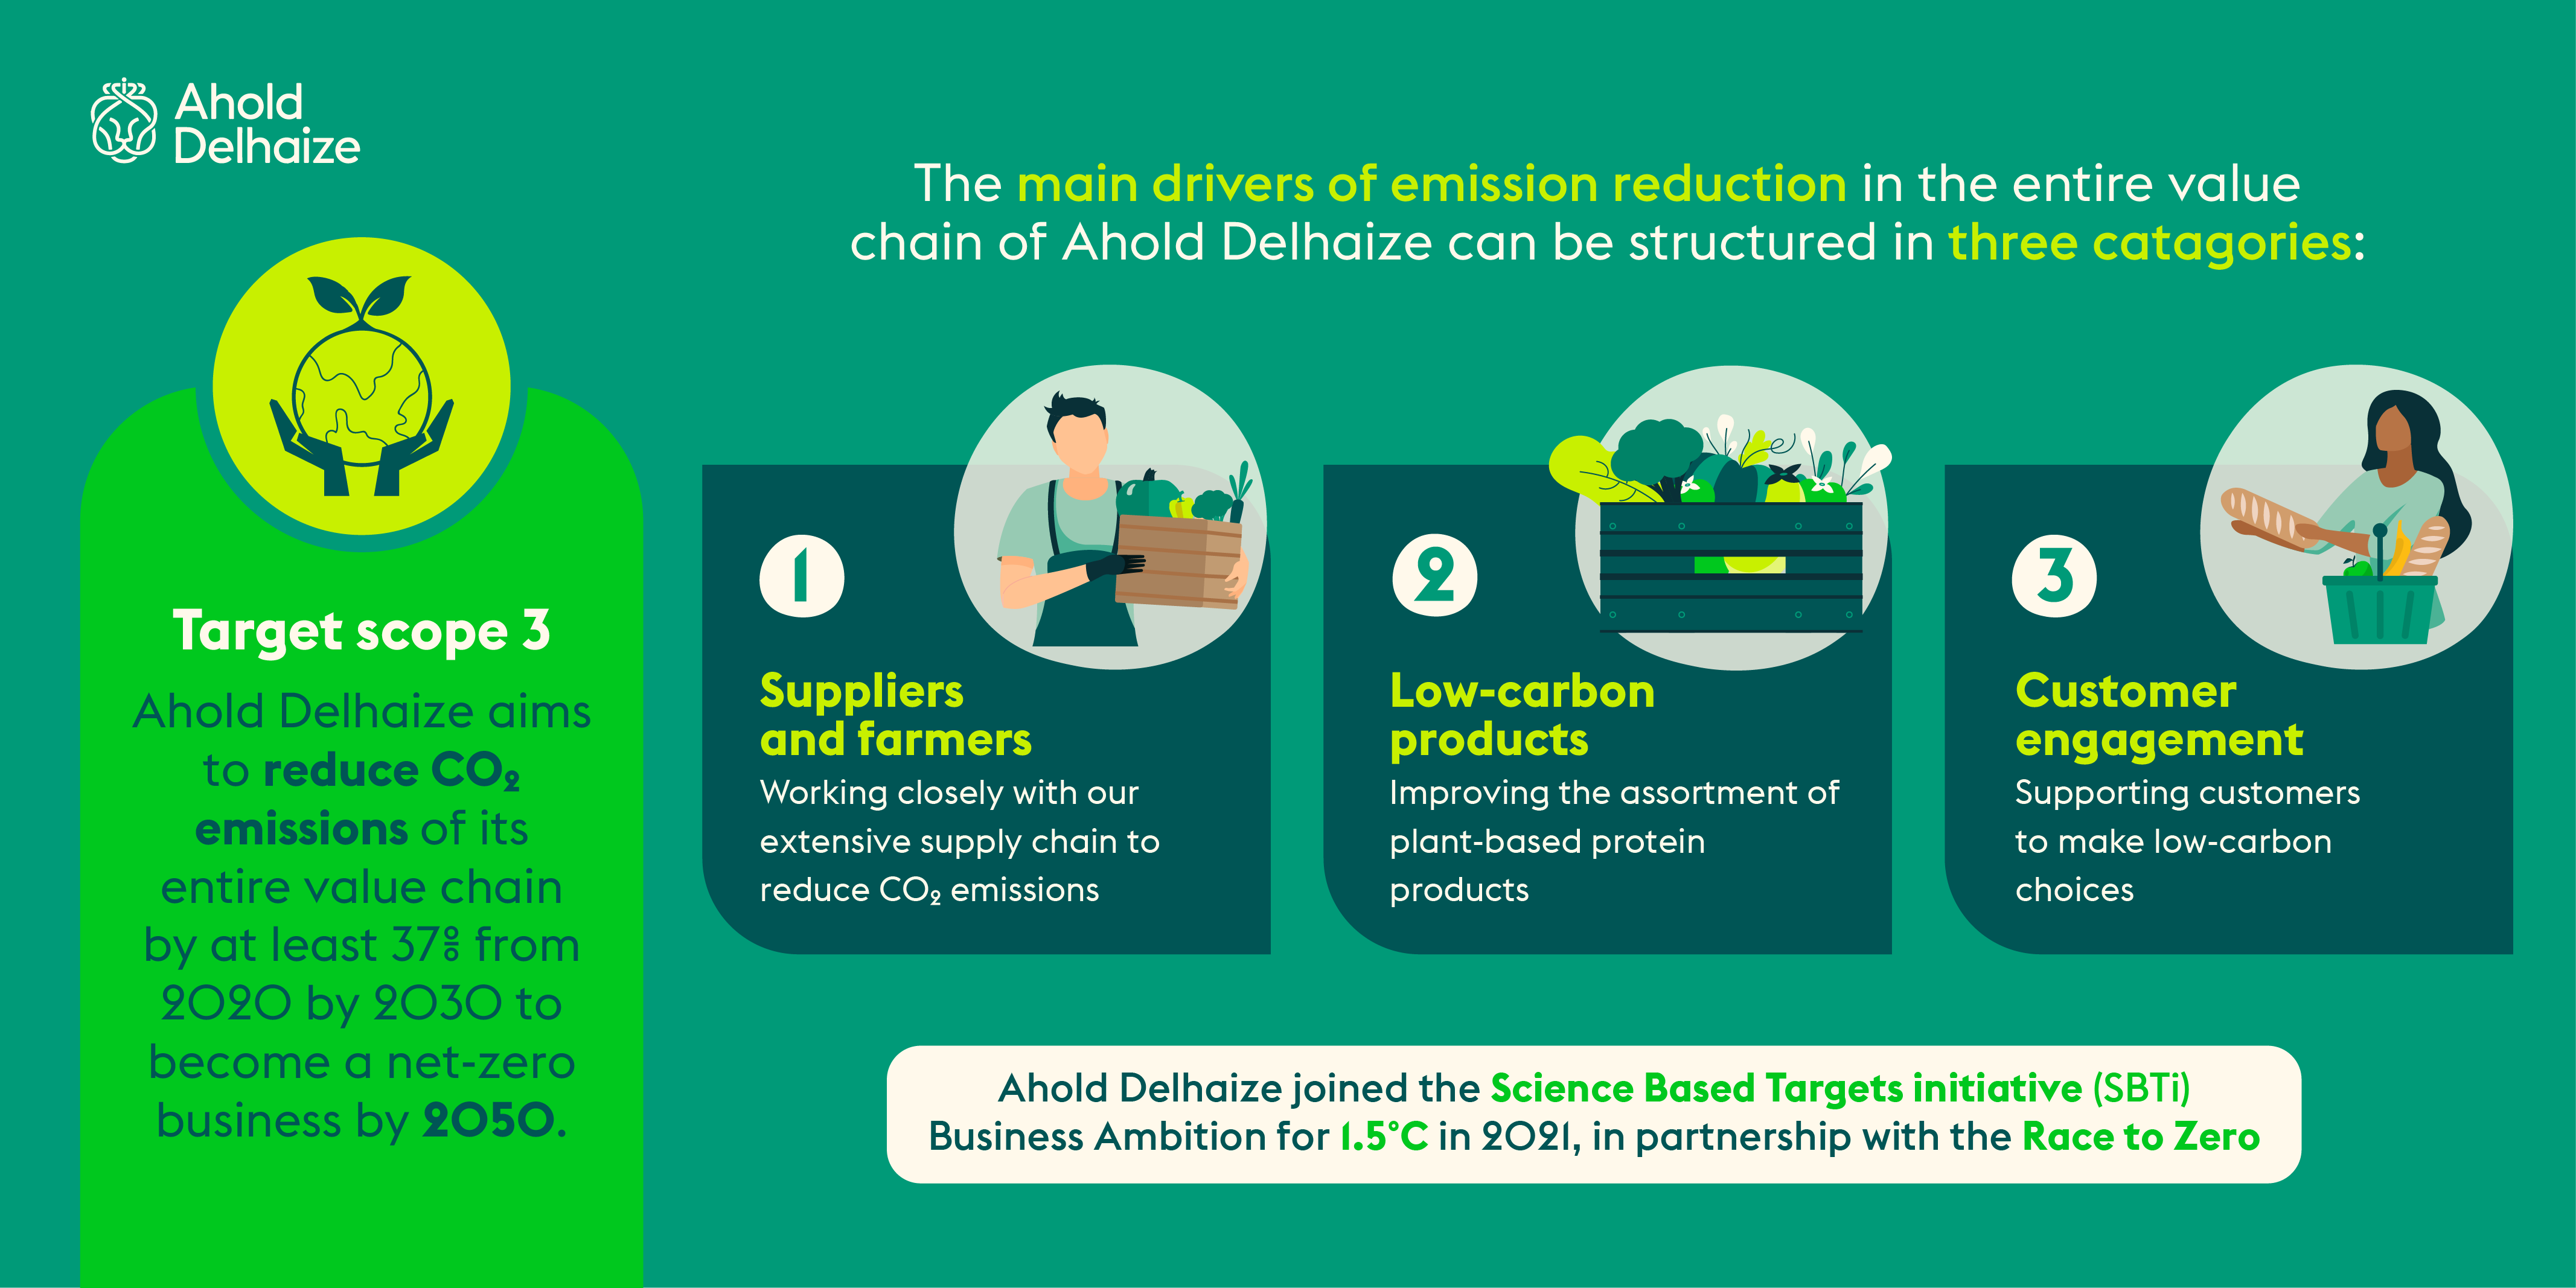 Ahold Delhaize sets updated CO2 emissions reductions target for its entire value chain, in line with UN goal of keeping global warming below 1.5°C - GlobeNewswire